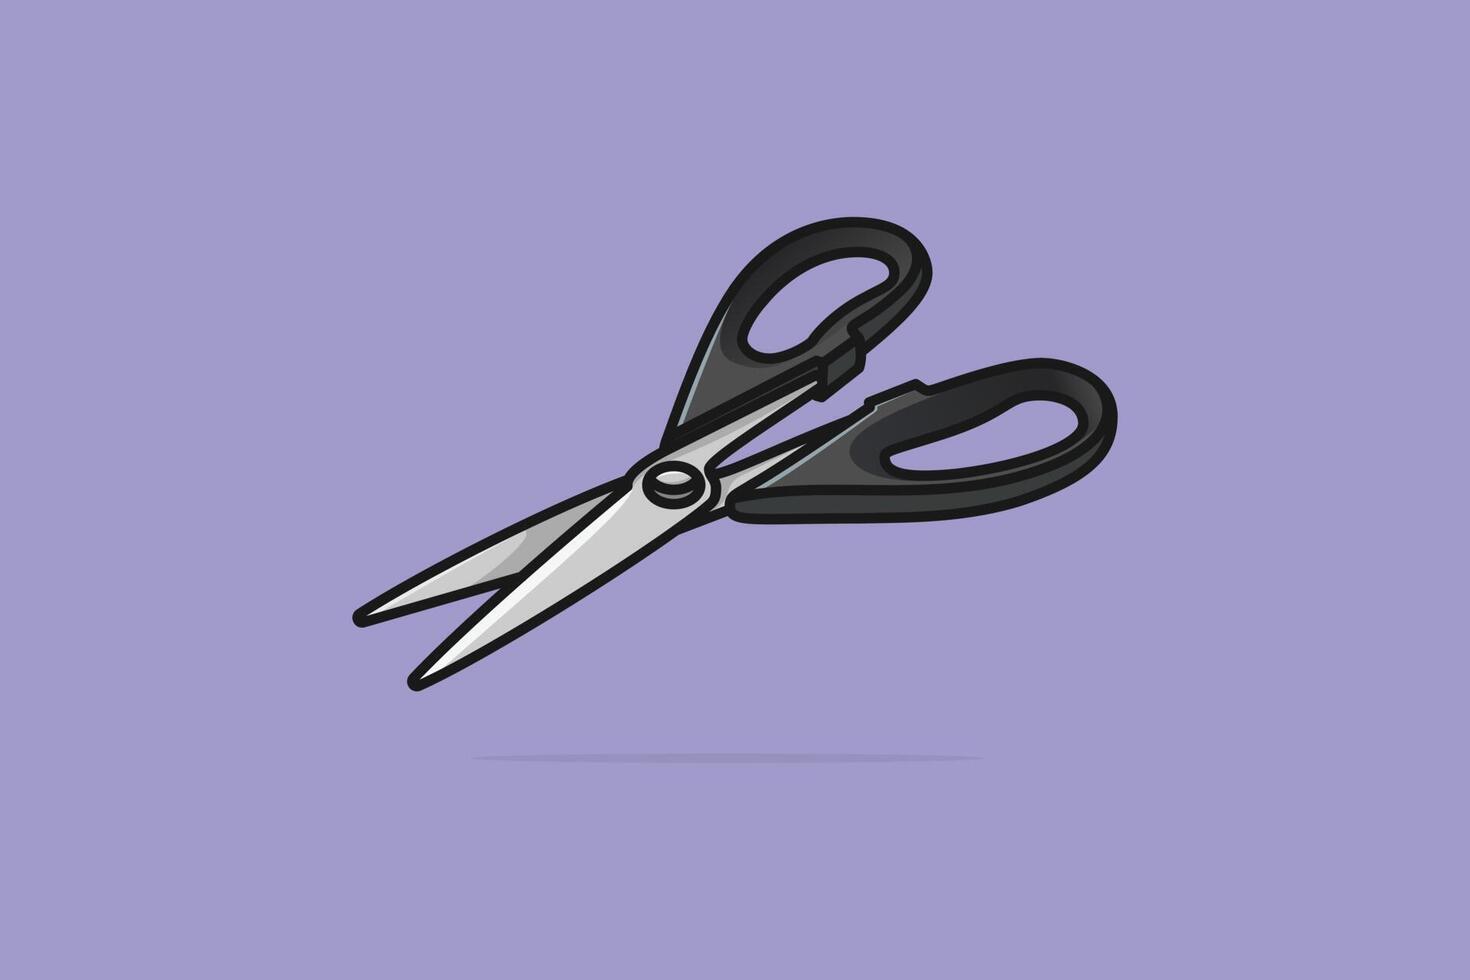 Metal Scissors with grey plastic handles vector illustration. Barber Shop and Gardening working tool icon concept. Sewing and fabric Scissors cutter vector design on purple background with shadow.